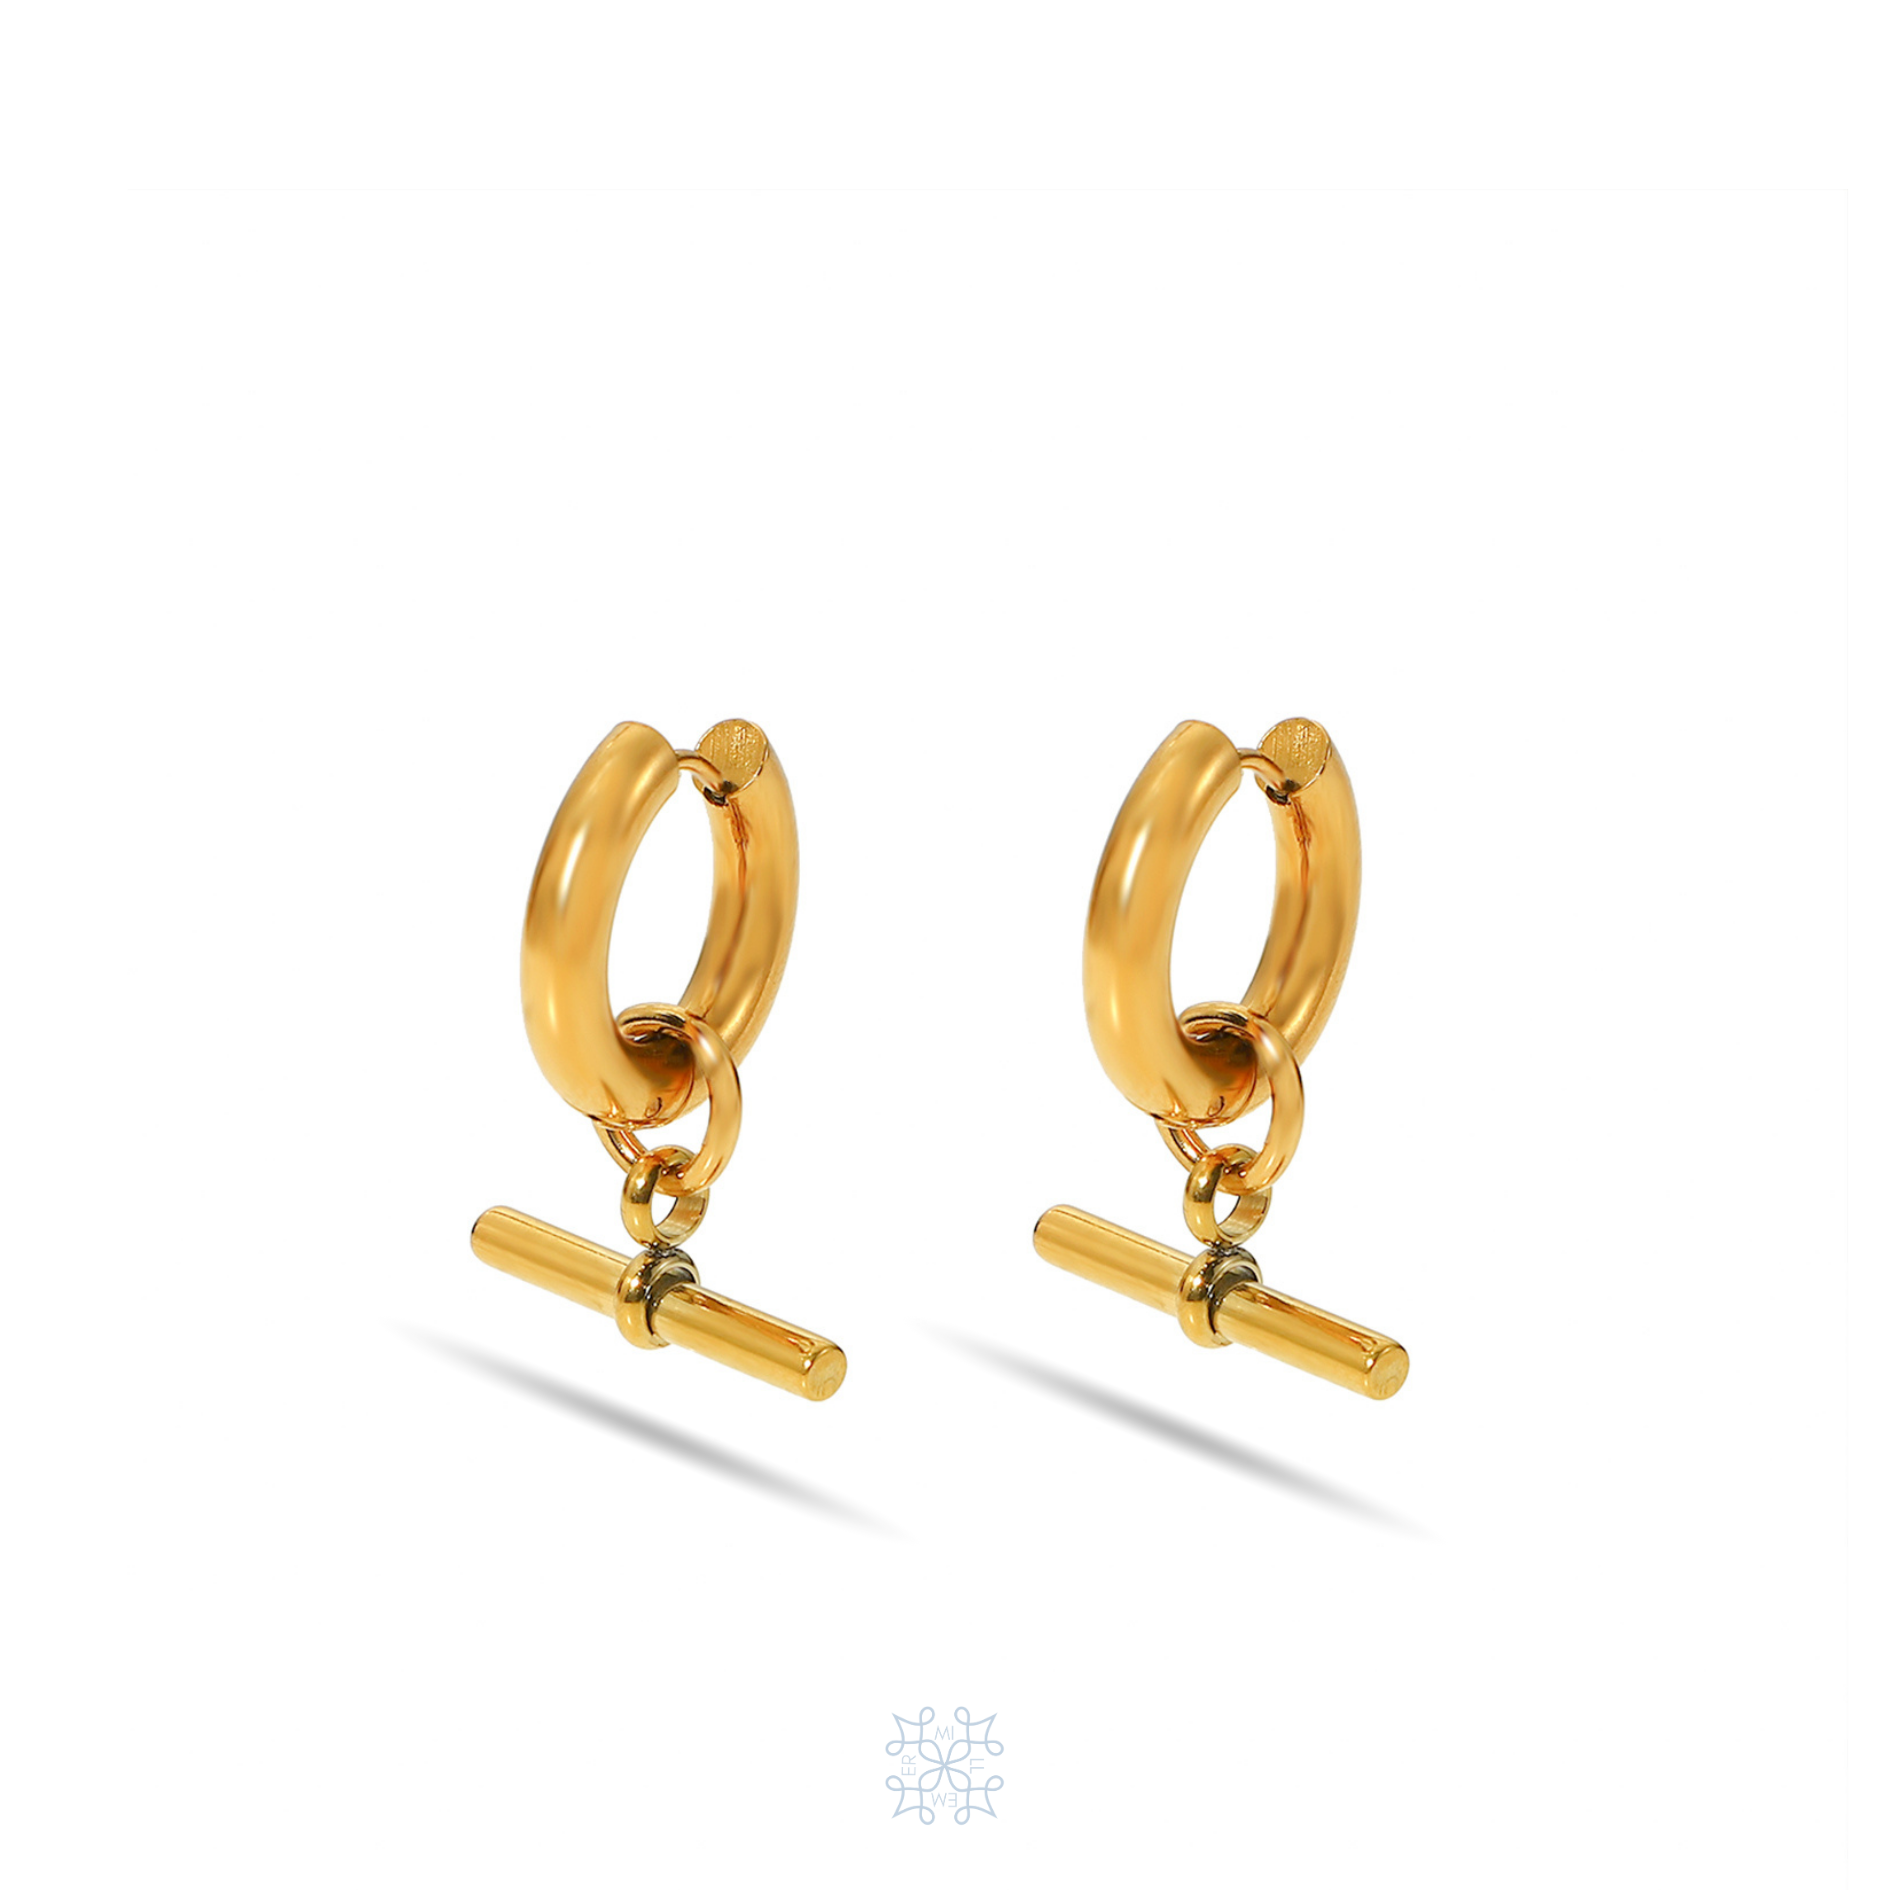 TIBET Gold Hoop Earrings. a T shape forming with an horizontal gold stick attched to the hoop. The metal is detachable from the hoop